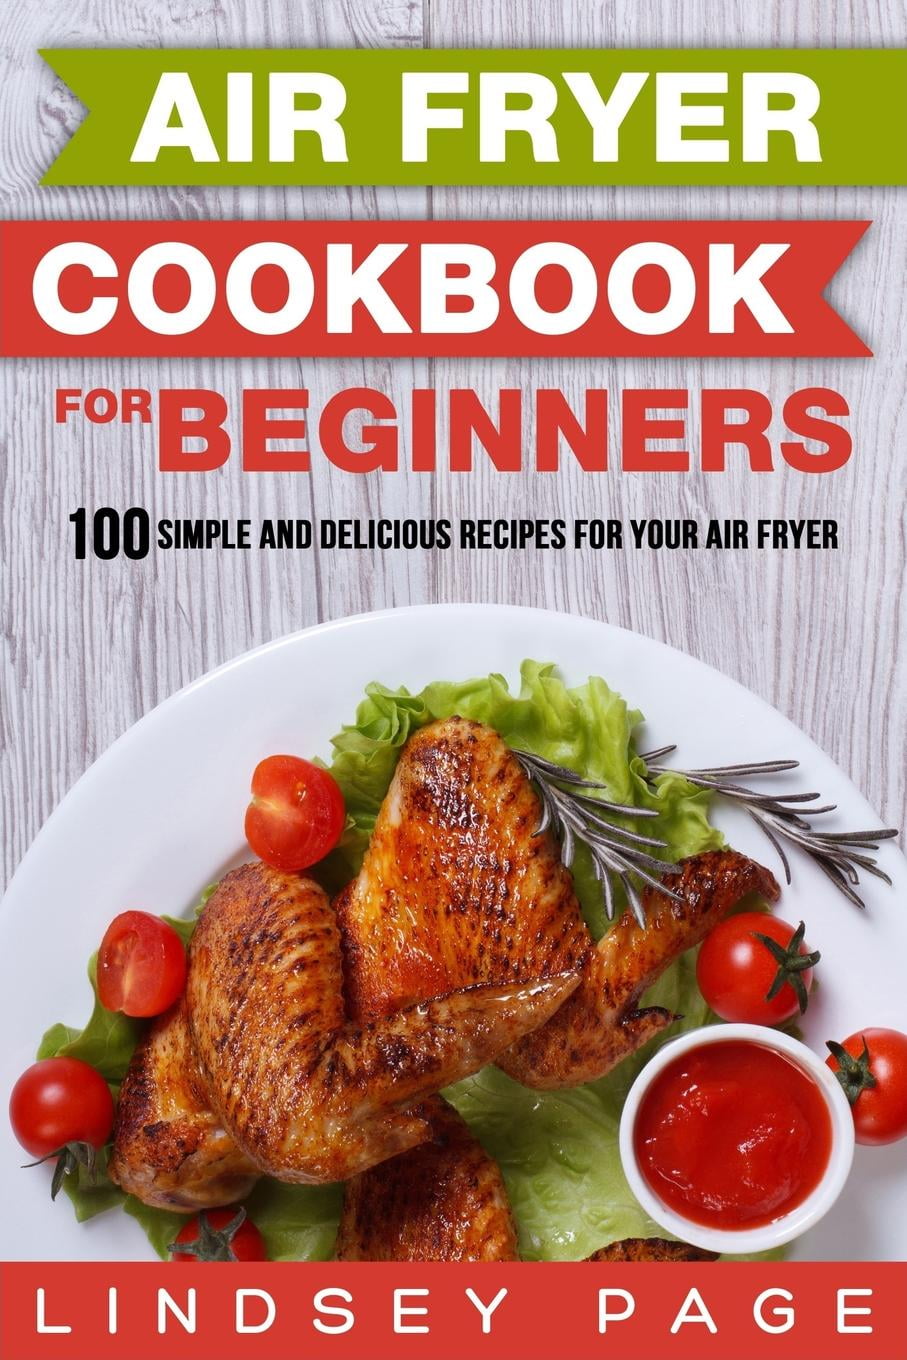 The Easy TaoTronics Air Fryer Cookbook: 500 Fresh and Foolproof